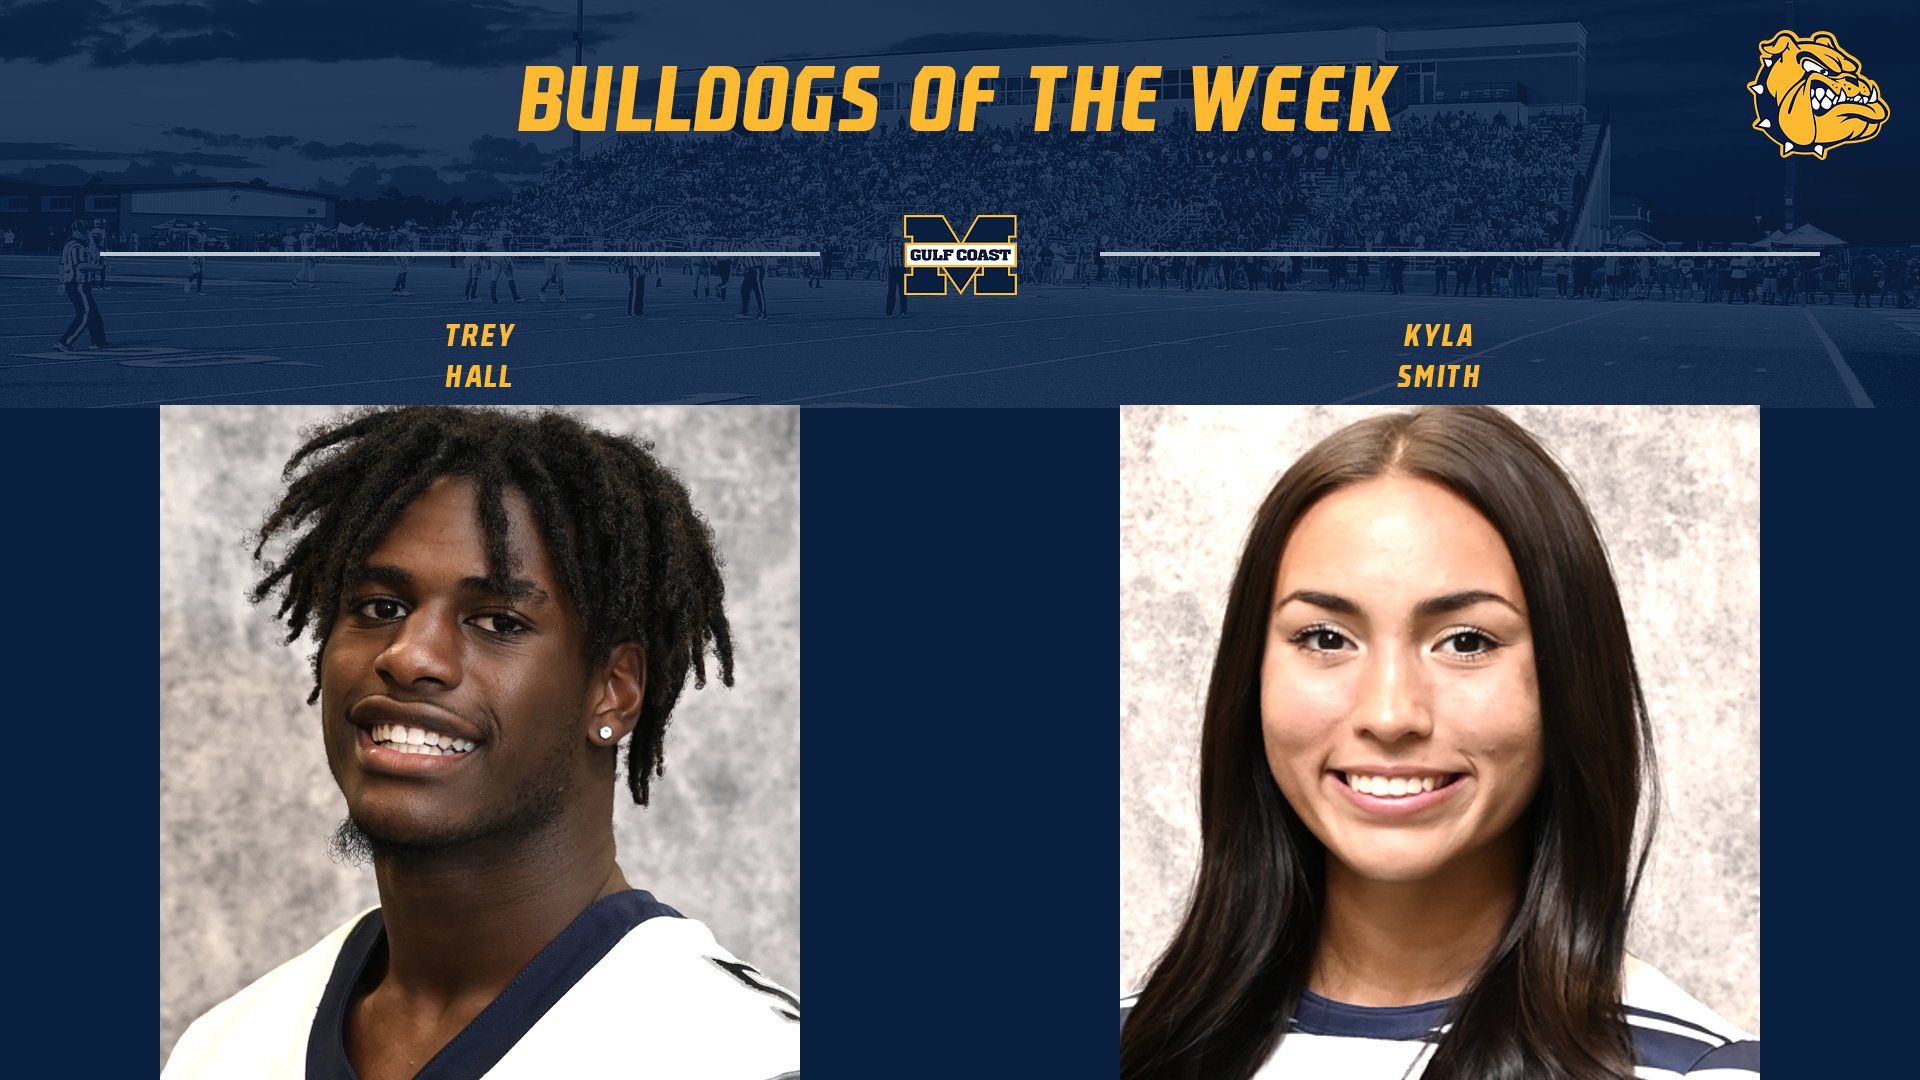 Hall, Smith named Bulldogs of the Week